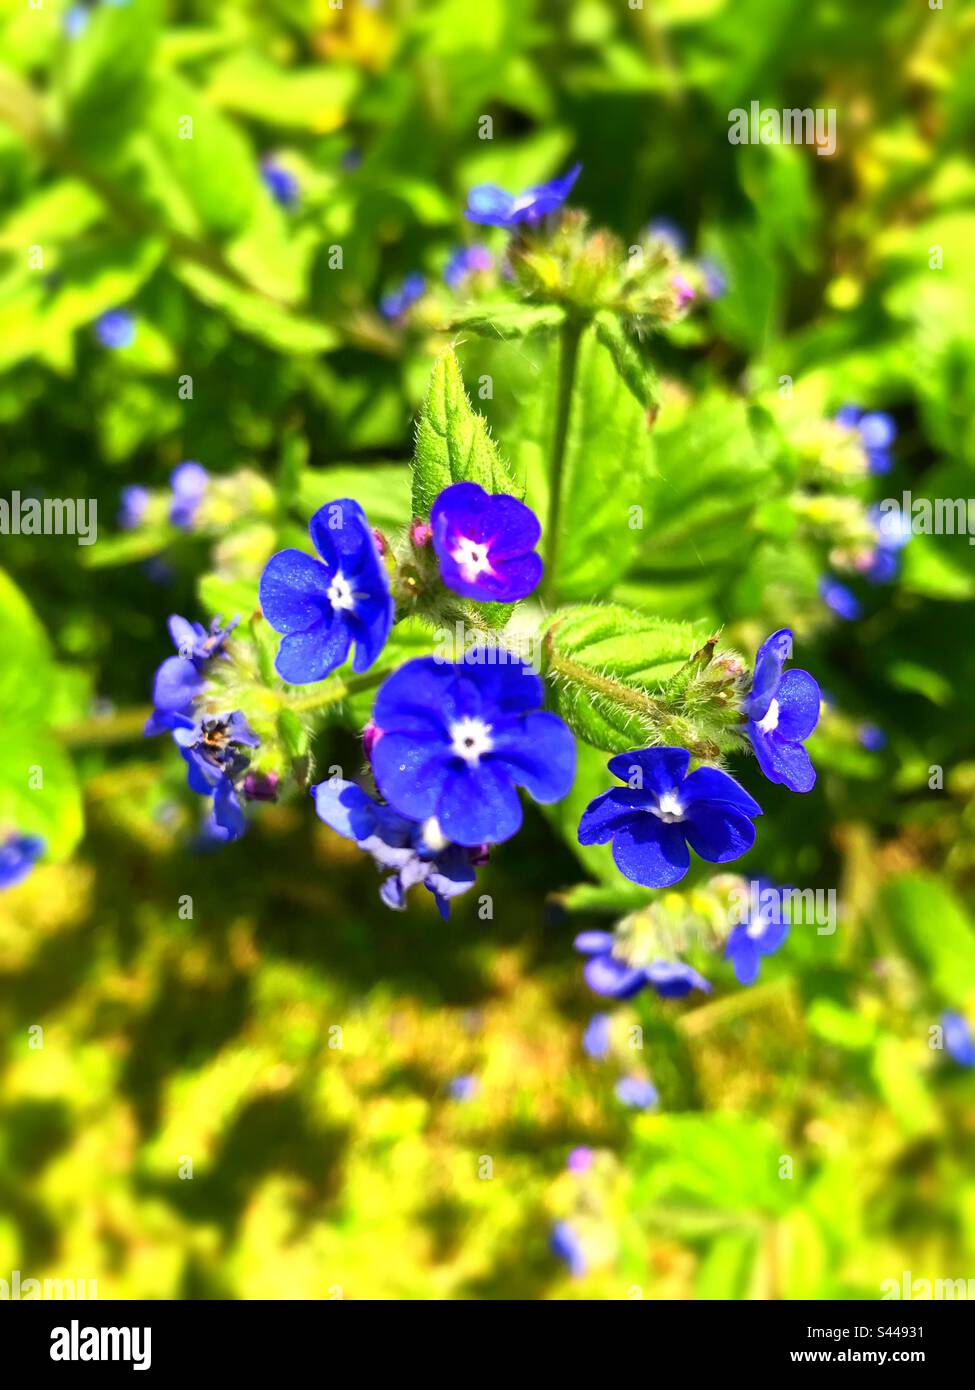 Green alkanet is a common perennial weed. Because it’s an attractive blue wildflower, some people choose to plant it in their gardens. Stock Photo